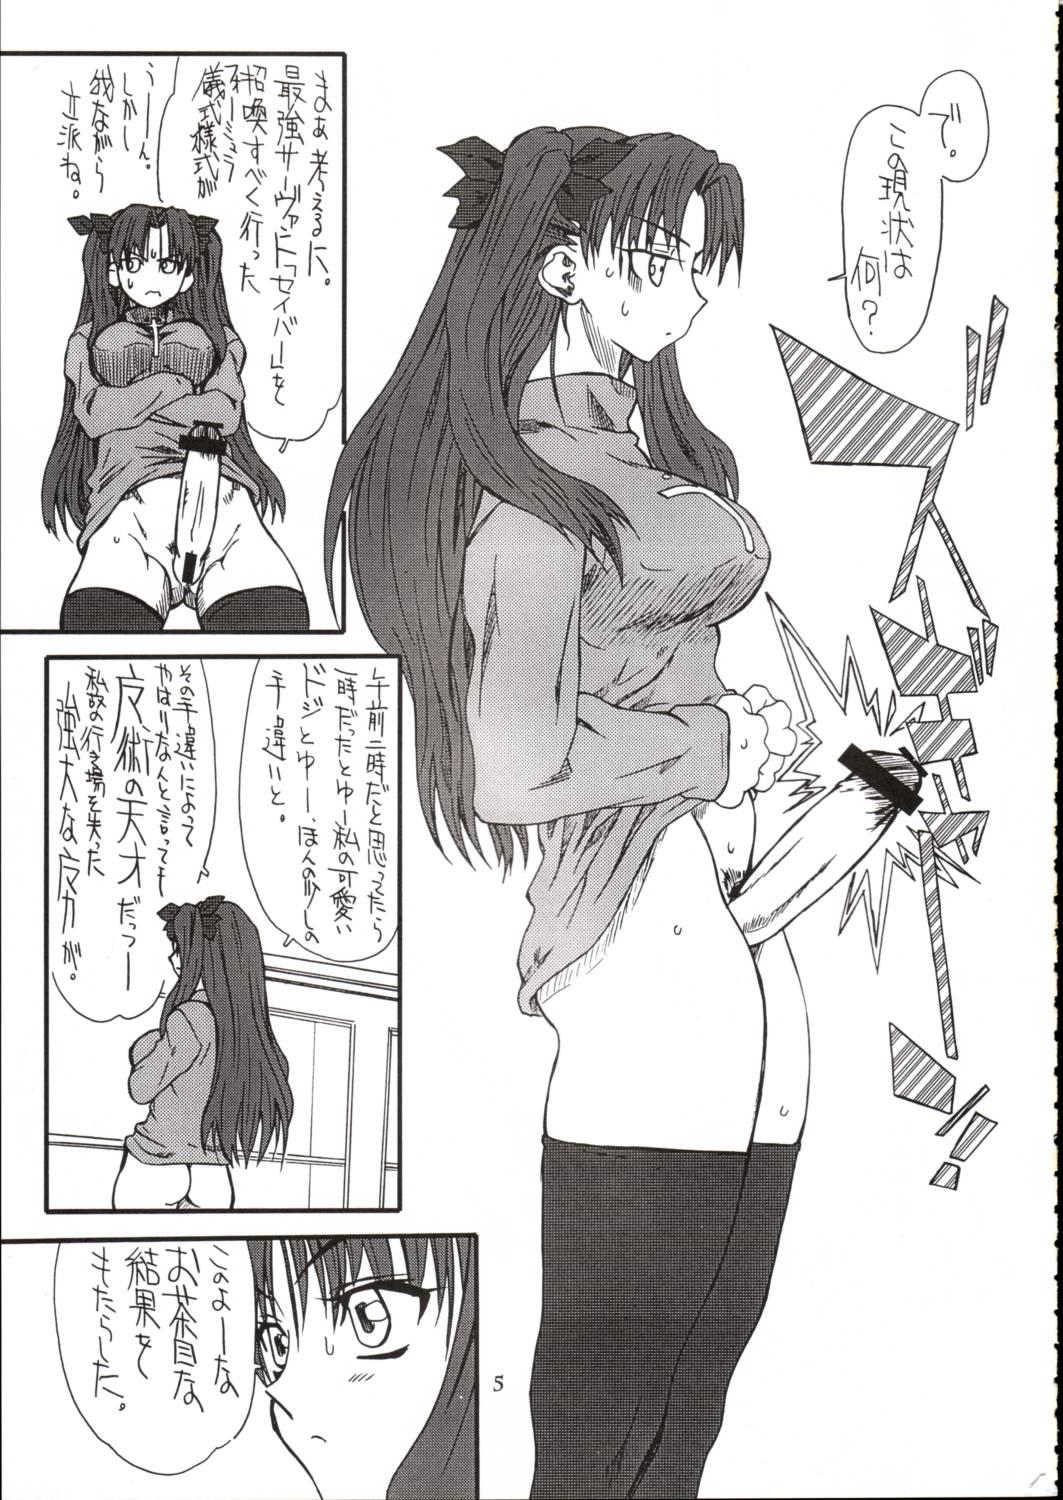 Lez Azuki Been - Fate stay night Dominant - Page 4